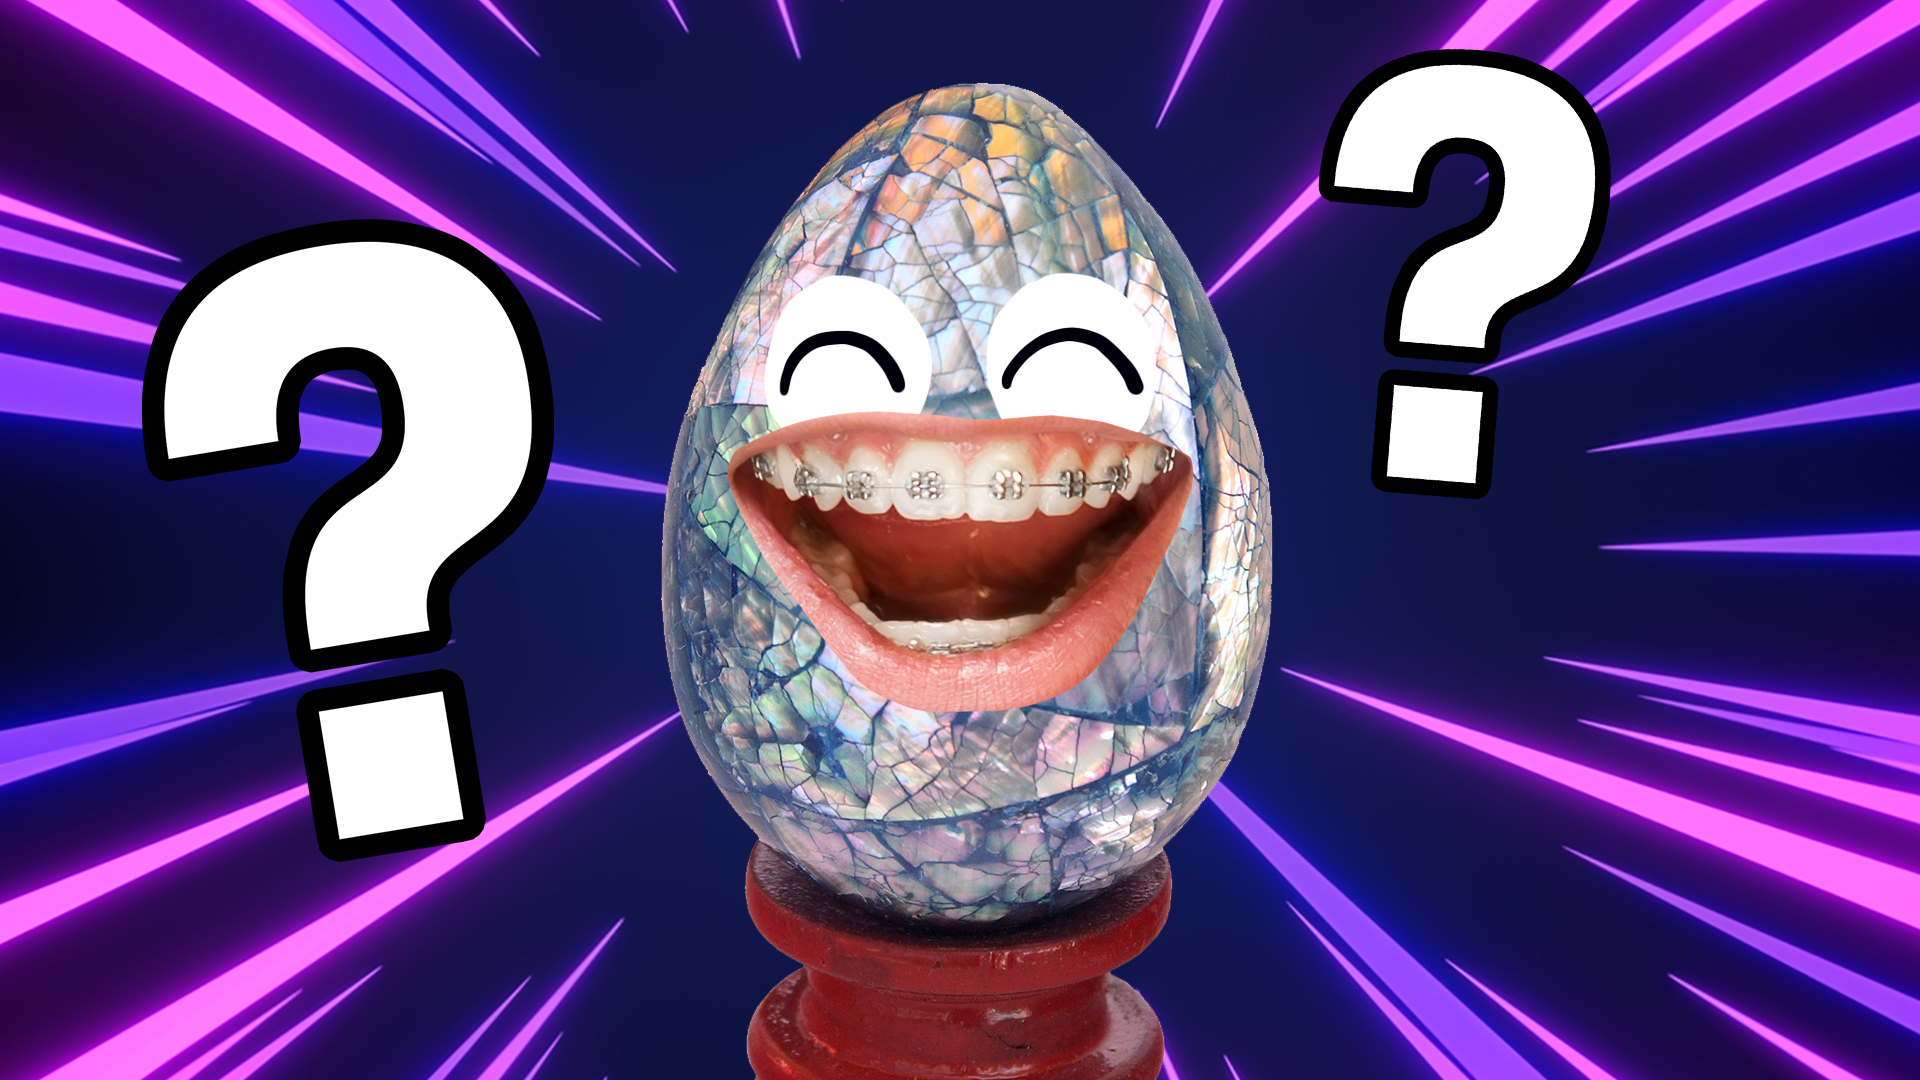 A fancy looking egg with braces